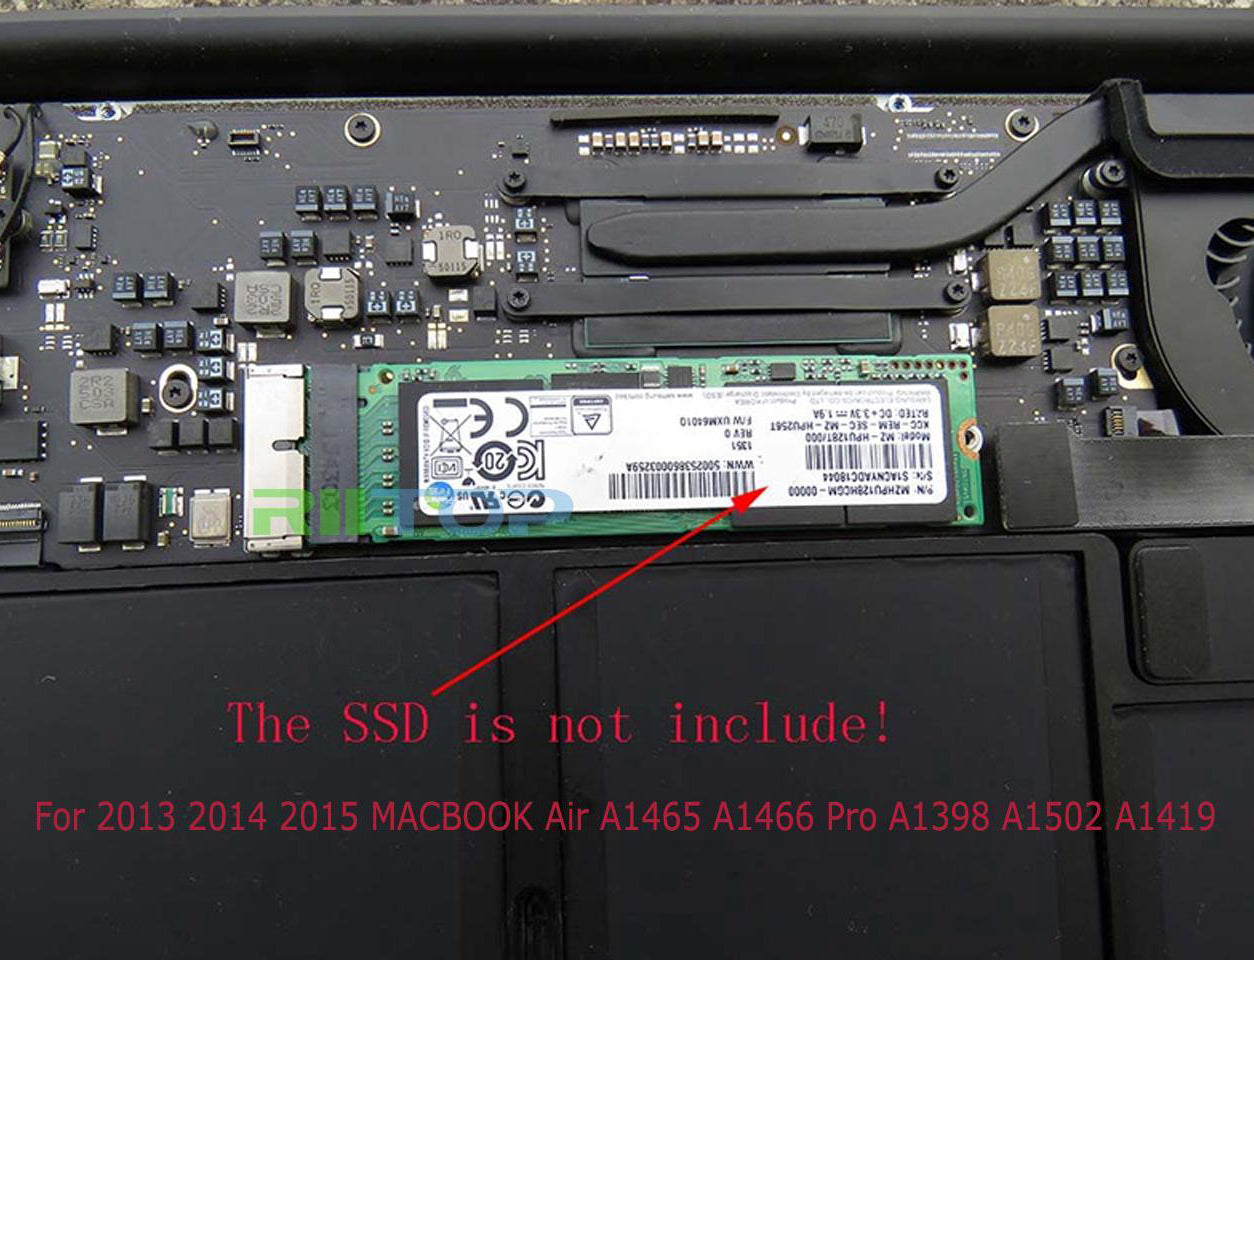 Tablet Booth hævn RIITOP M.2 PCI-e SSD Adapter Card for MACBOOK Air 2013 2014 2015 A1465